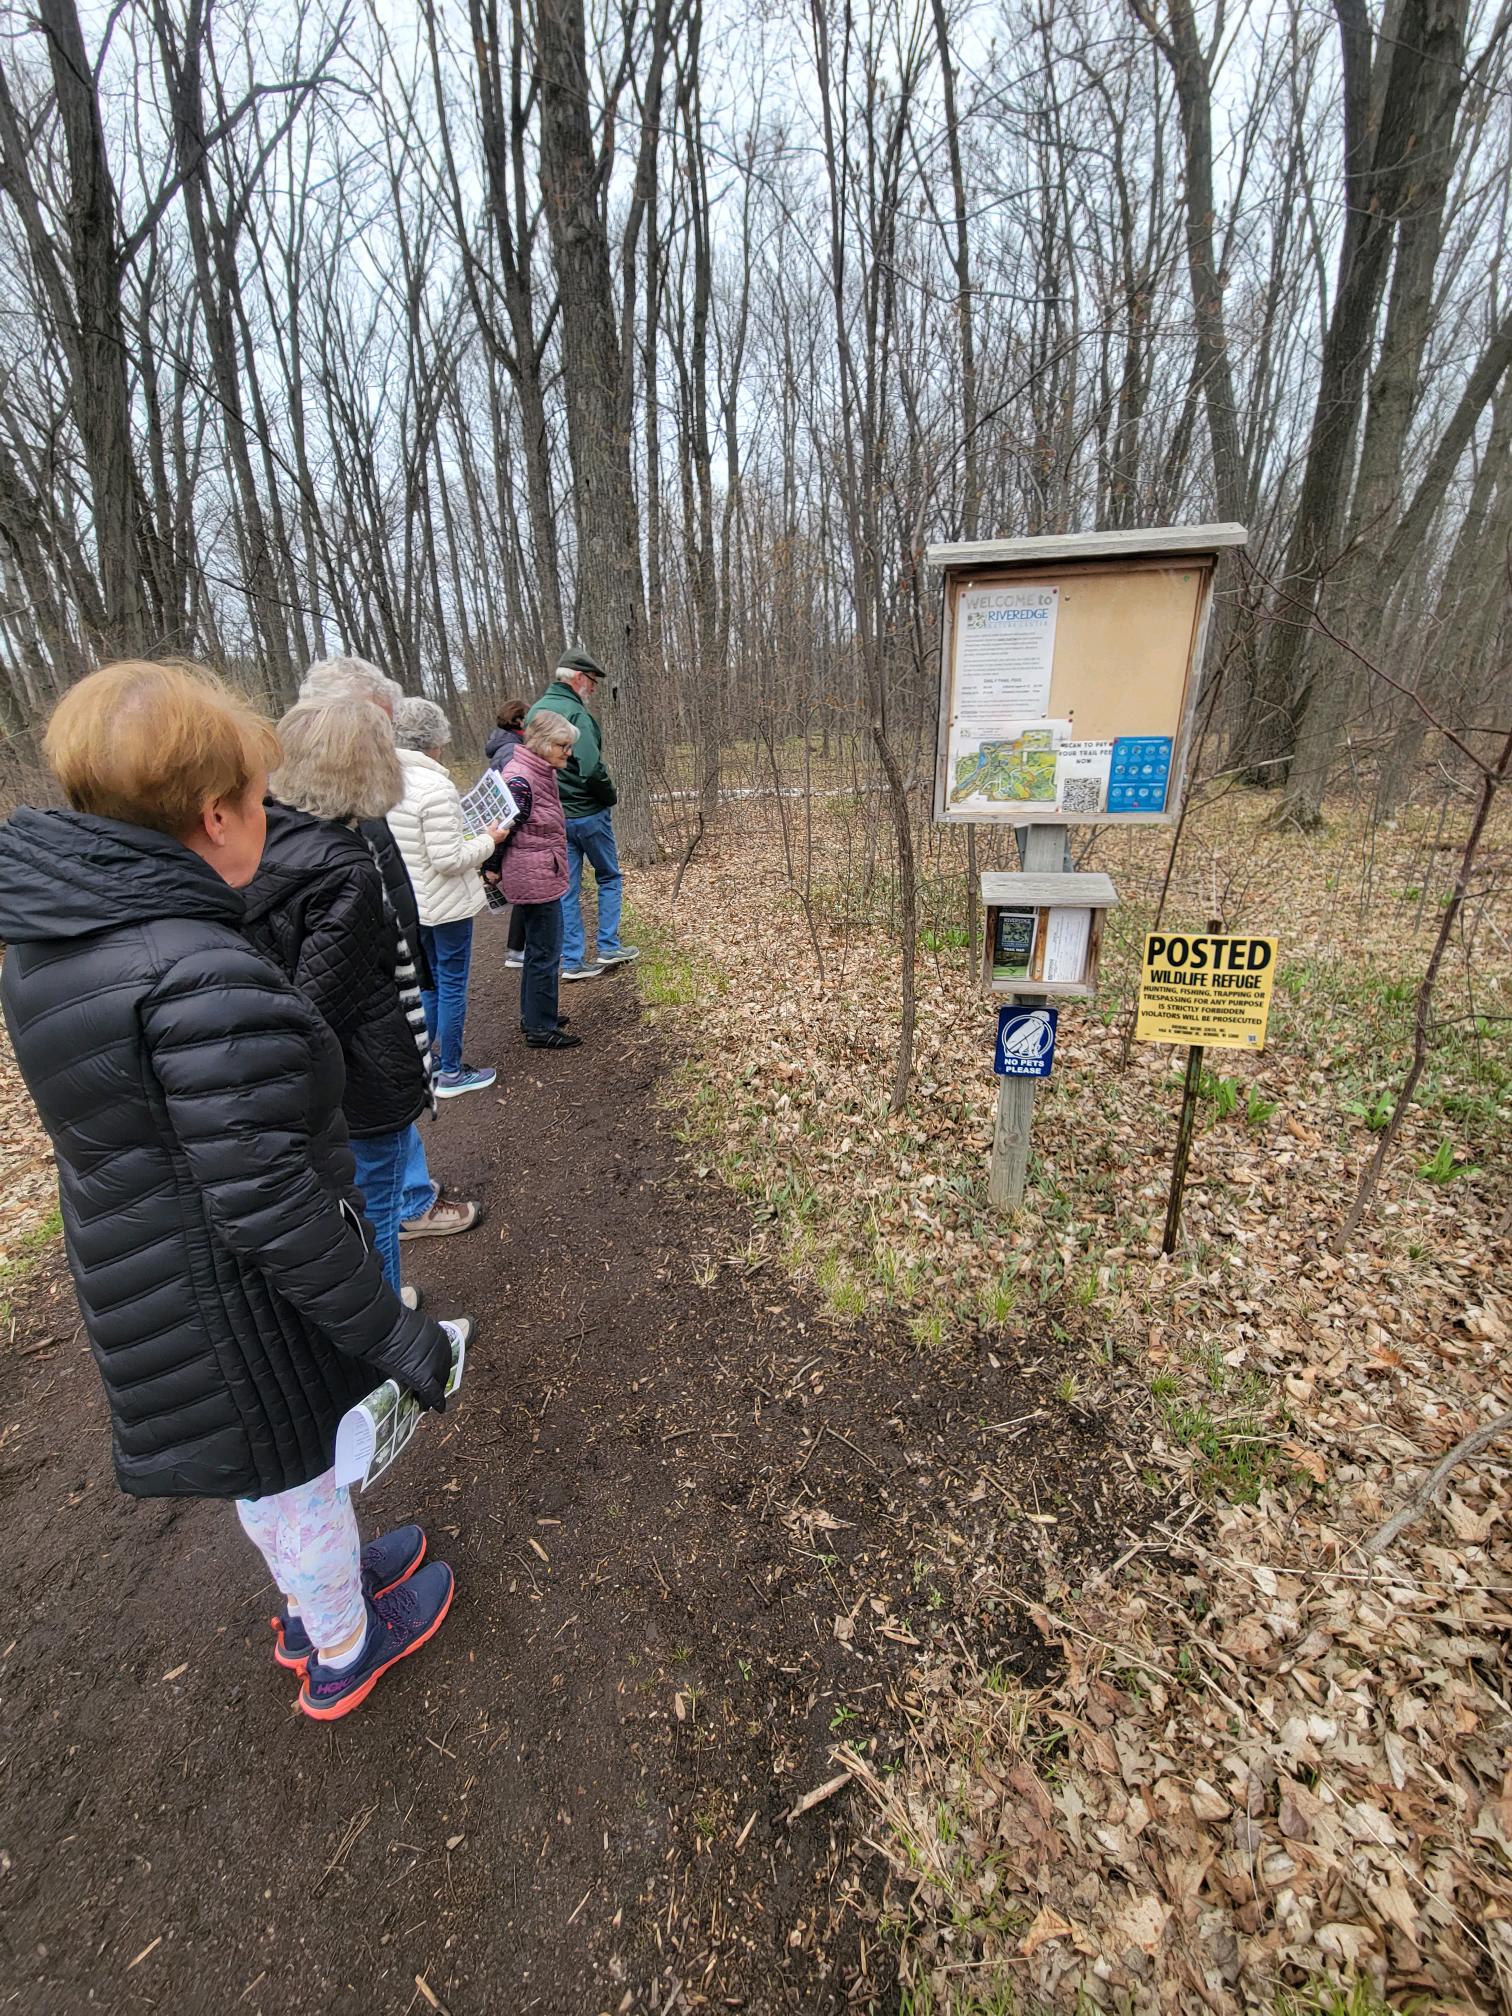 a group of older adults wearing coats stands on the dirt trail in the forest looking at a kiosk